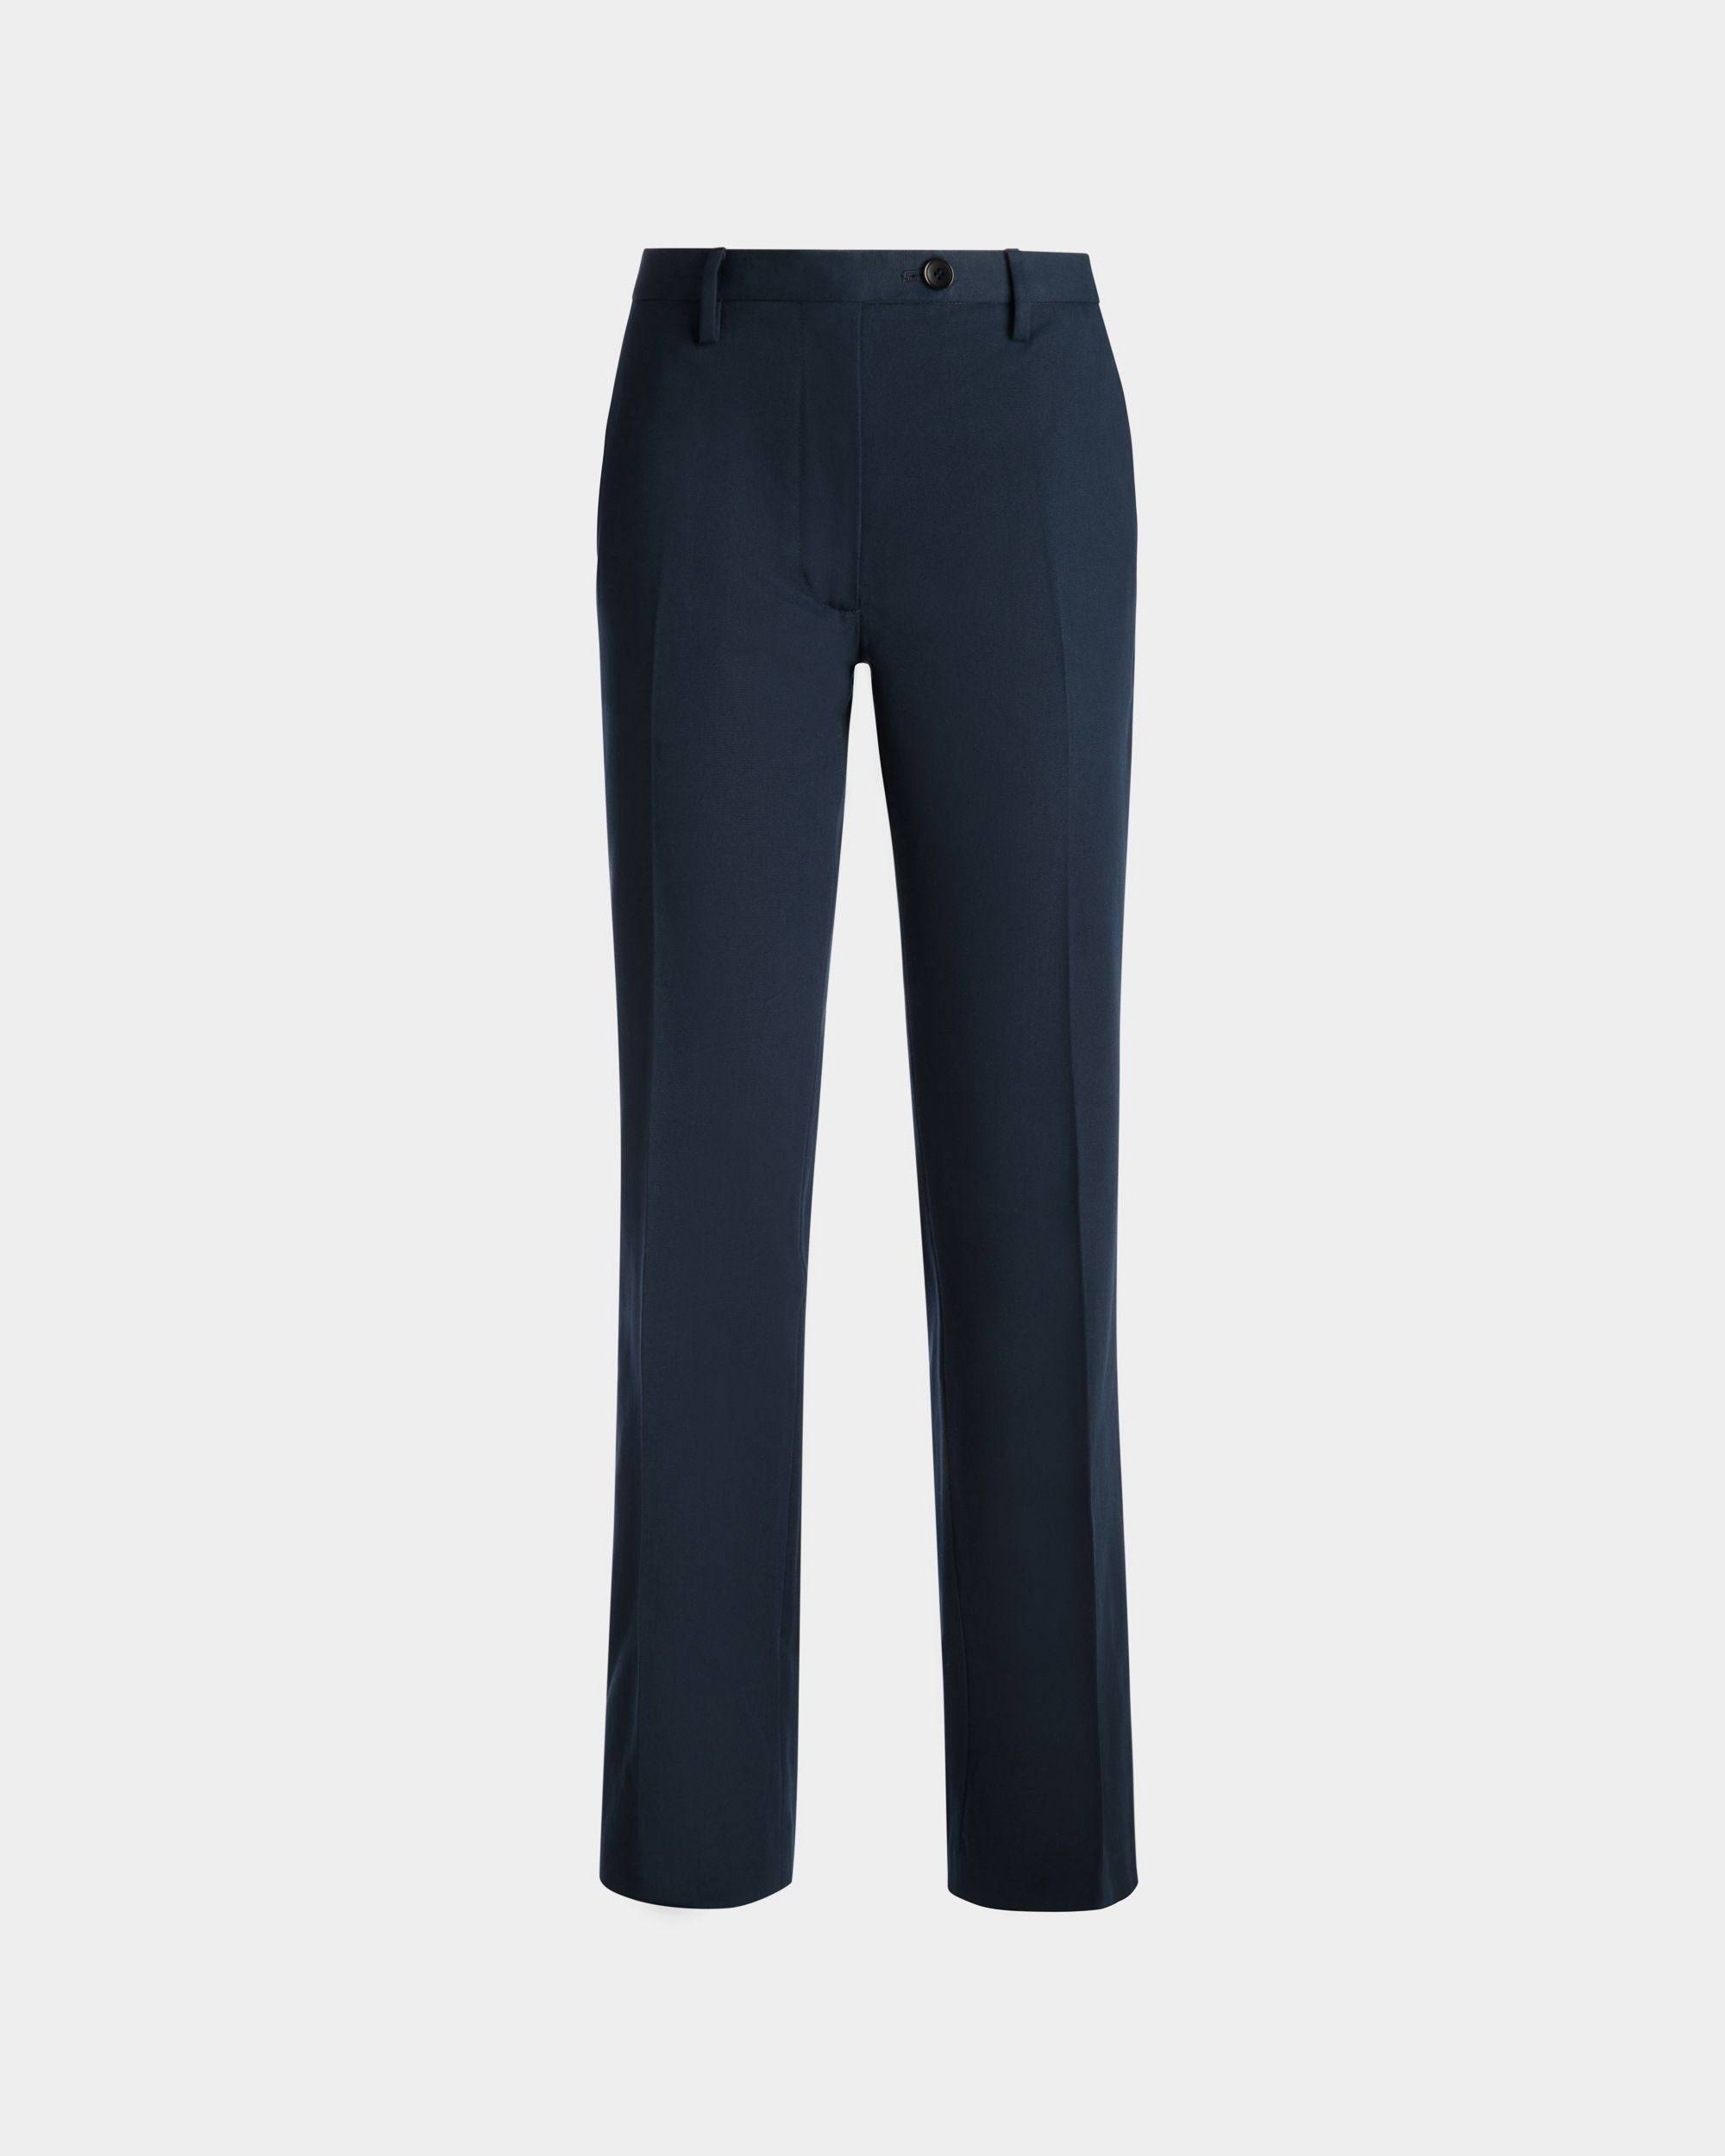 Women's Pants in Blue Cotton | Bally | Still Life Front